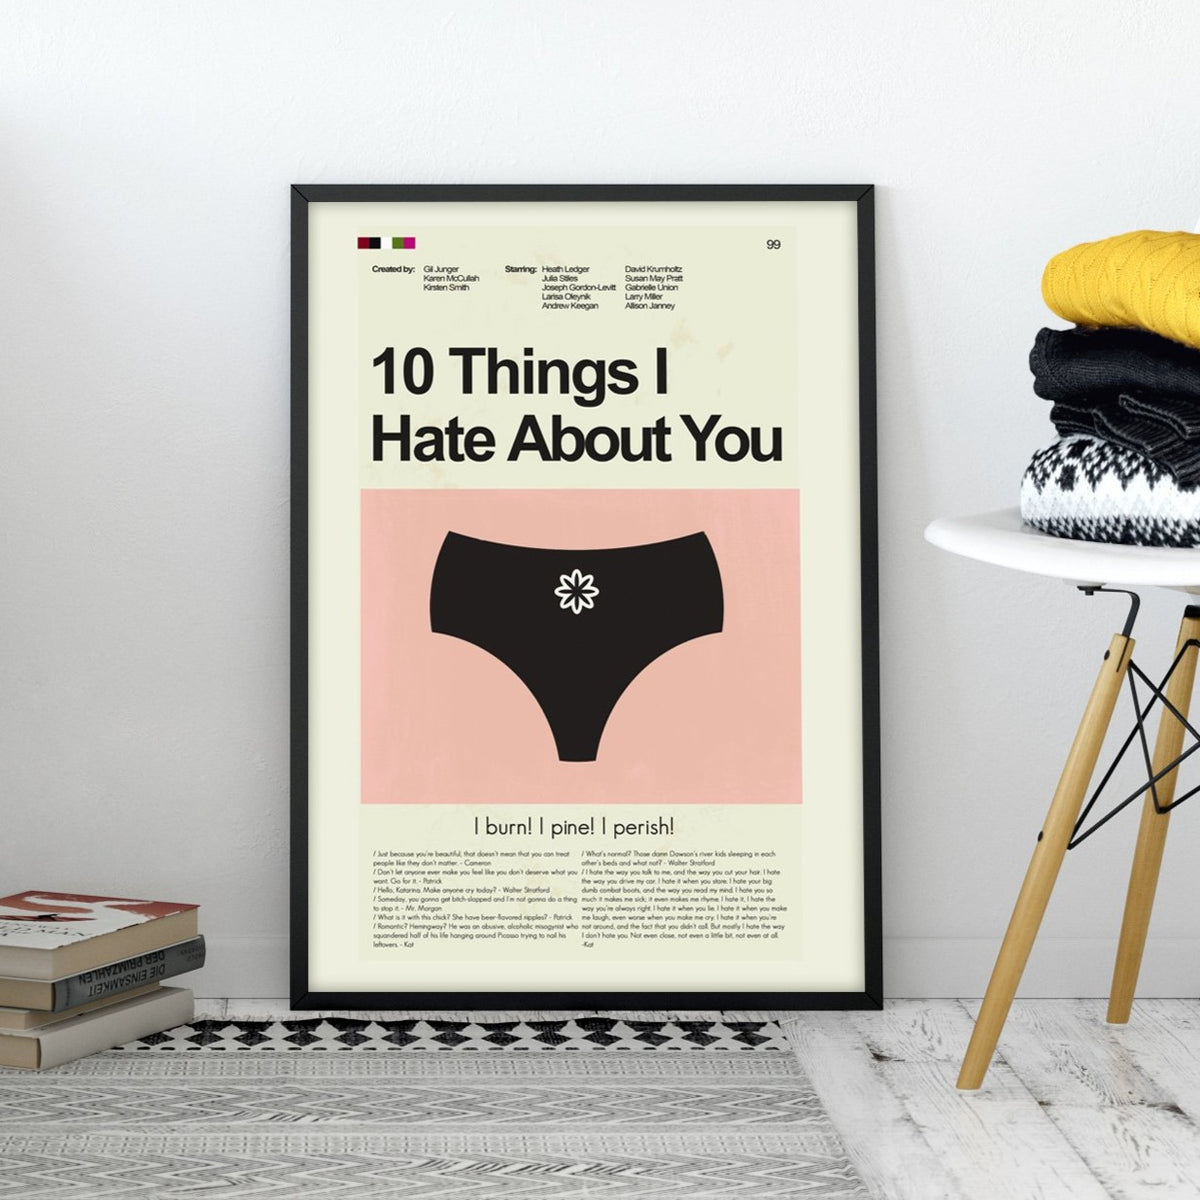 10 Things I Hate About You - Kat's Black Underwear